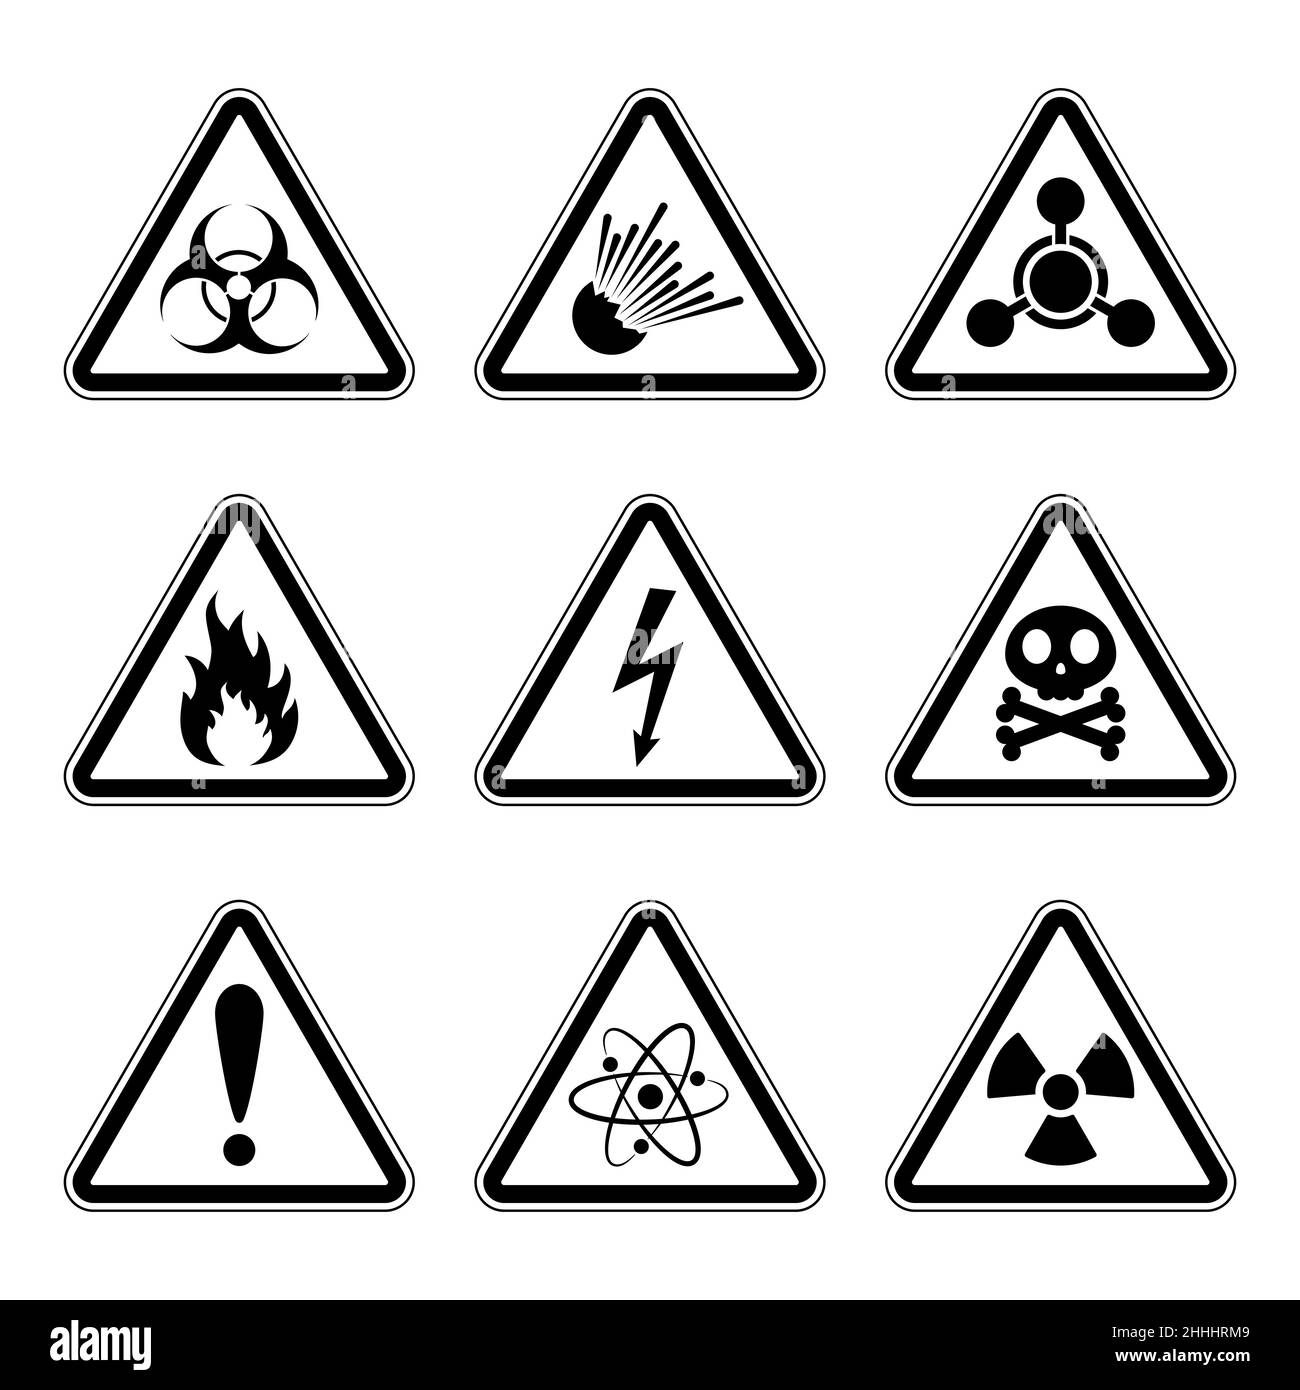 Set of warning danger signs, isolated on white background. Vector illustration. Set of triangular warning hazard signs. Stock Vector